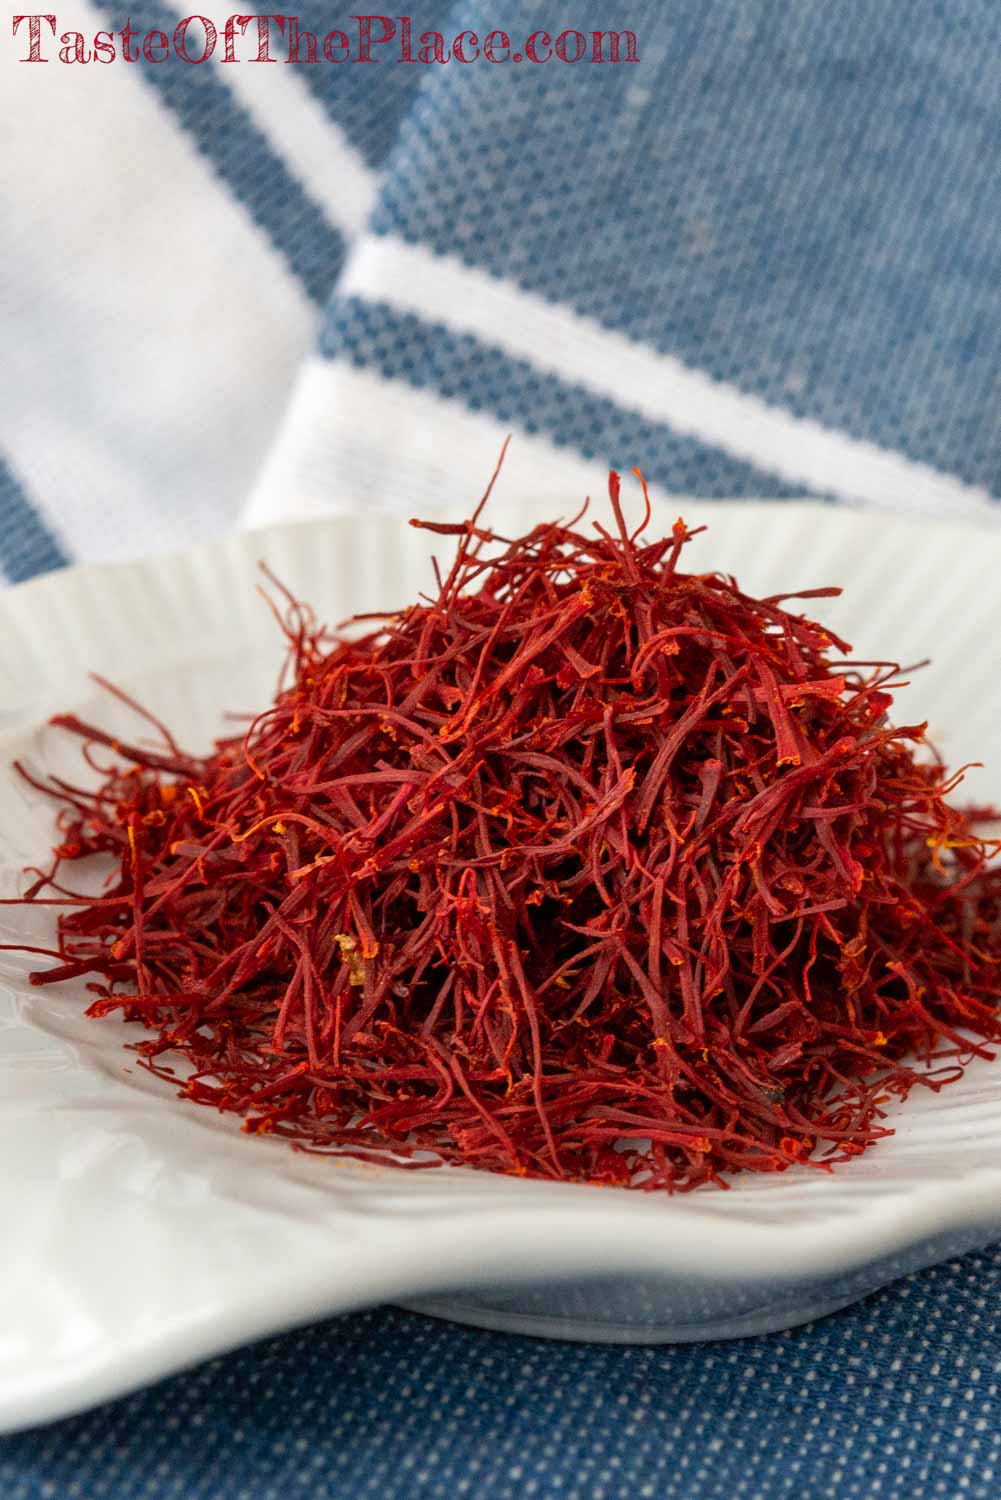 Saffron: Everything You Need to Know About the World’s Most Expensive Spice